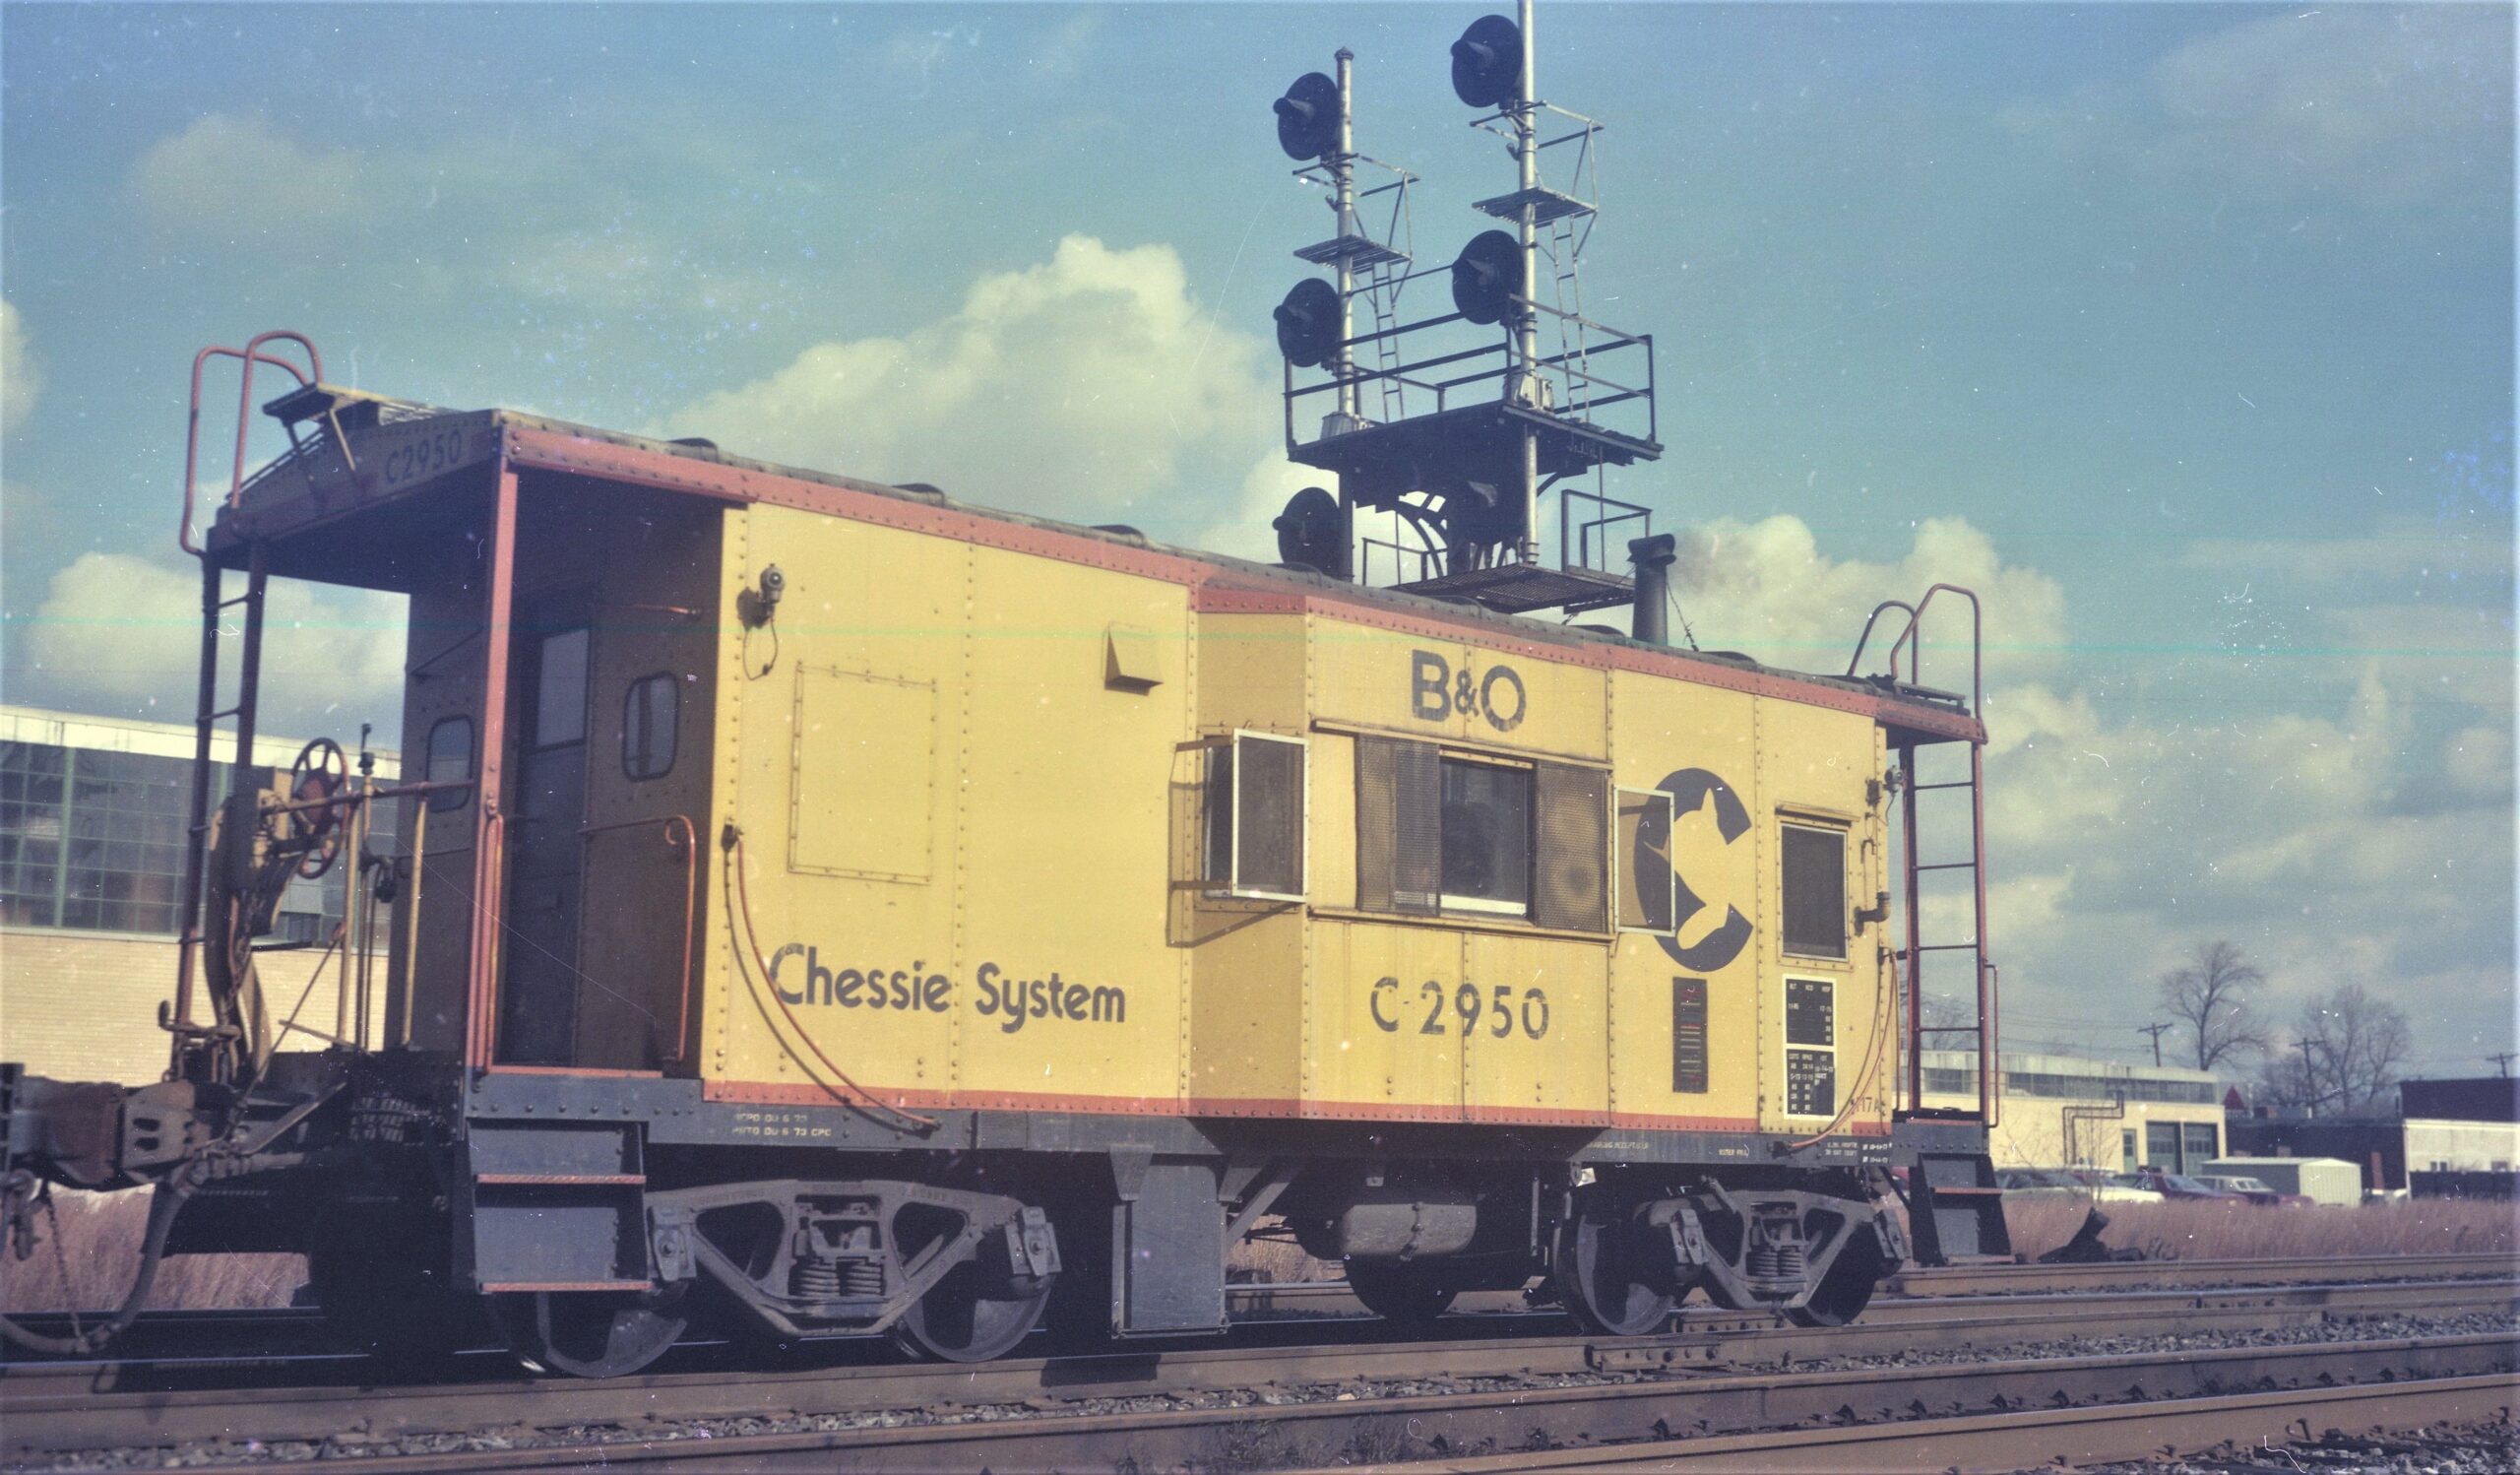 Baltimore and Ohio | Roselle, New Jersey | I-17A Caboose C2950 | November 11, 1977